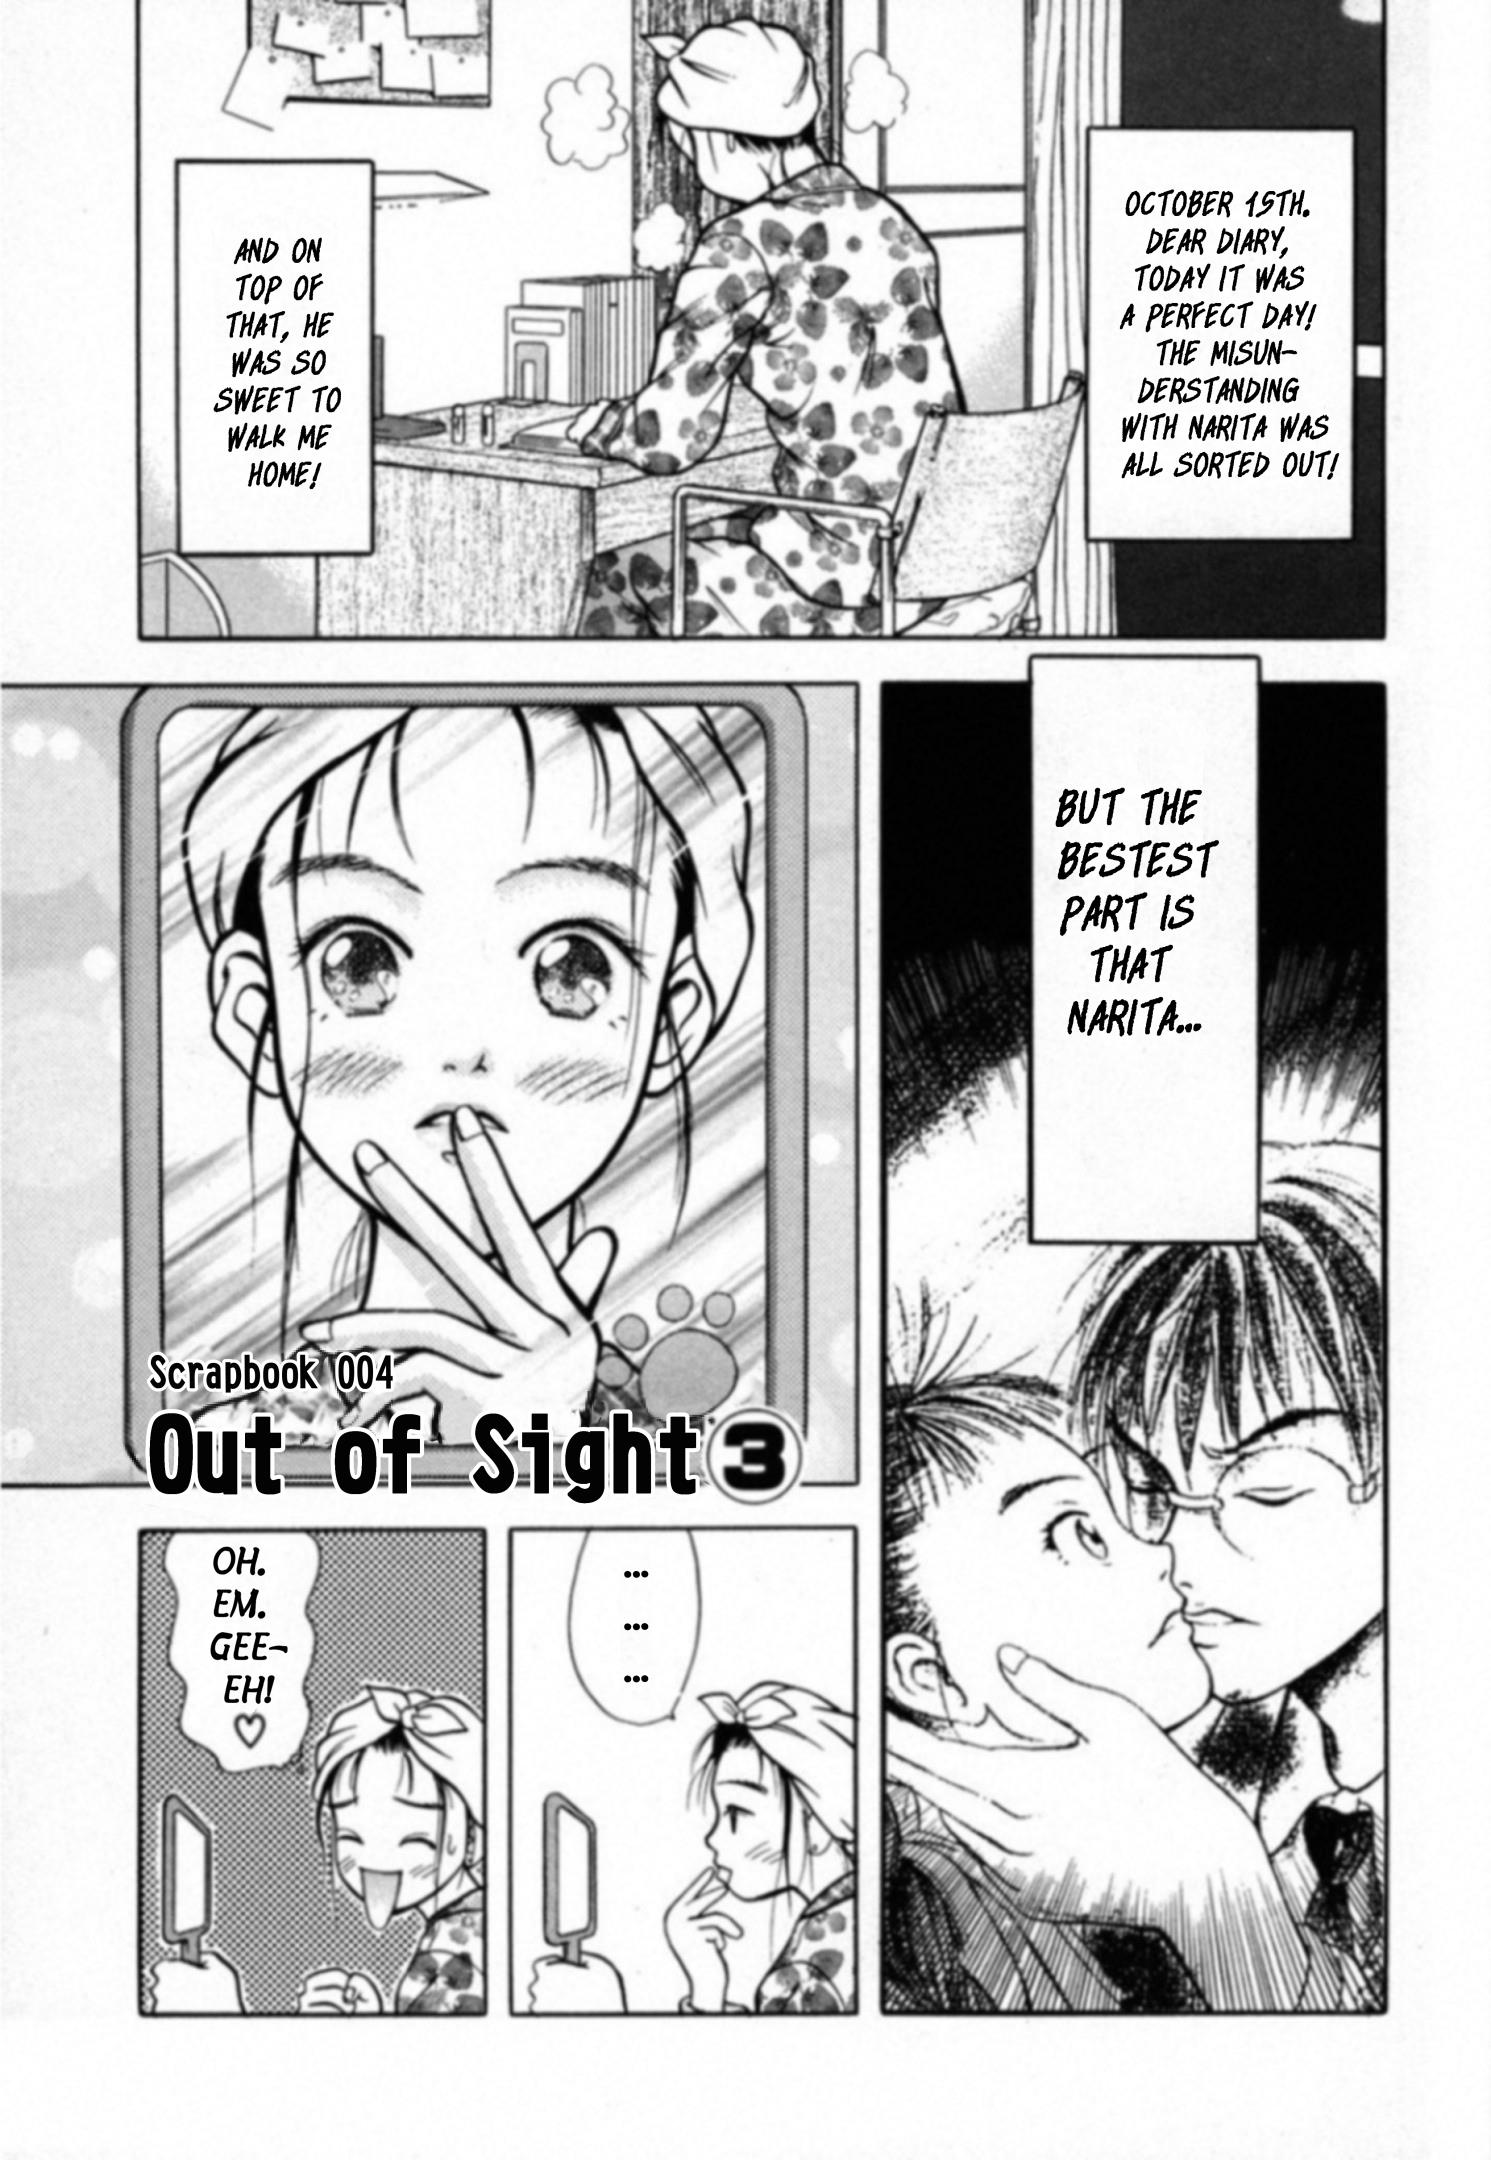 Kakeru Vol.2 Chapter 28: Out Of Sight - 3 - Picture 1